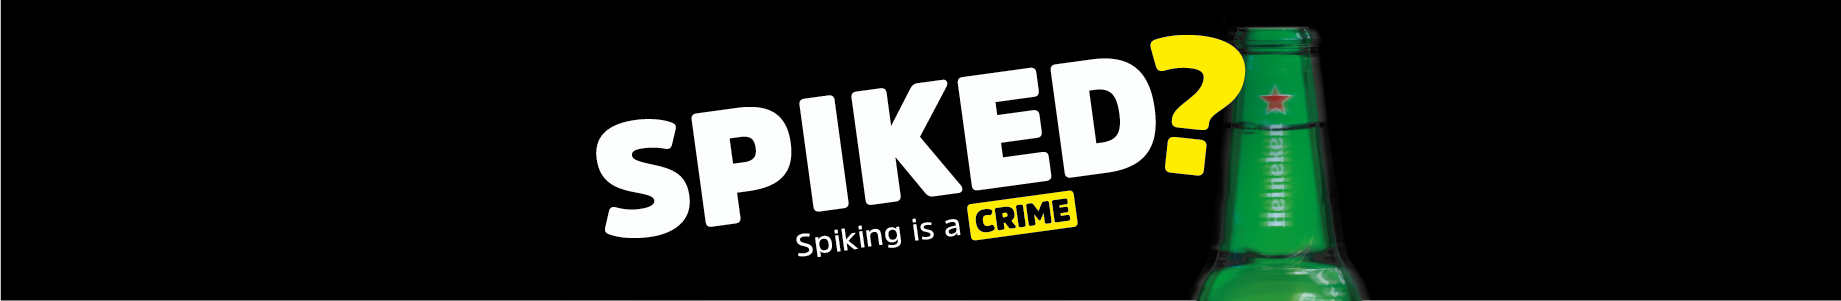 image of a beer bottle with the messaged Spiked? Spiking is a crime.